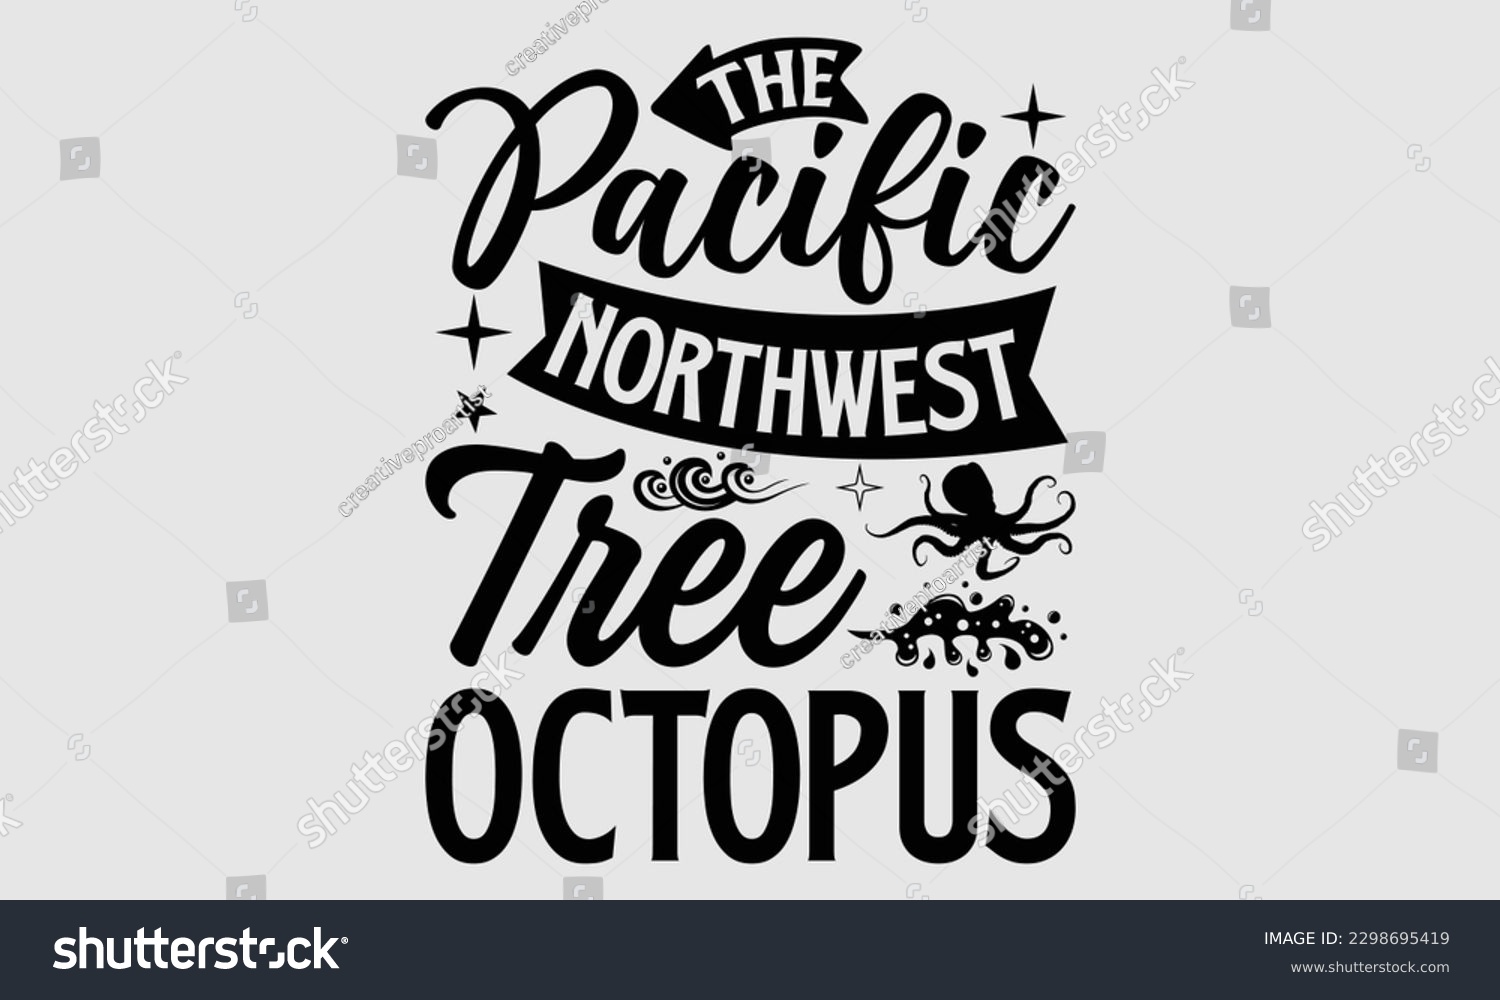 SVG of The pacific northwest tree octopus- Octopus SVG and t- shirt design, Hand drawn lettering phrase for Cutting Machine, Silhouette Cameo, Cricut, greeting card template with typography white background, svg